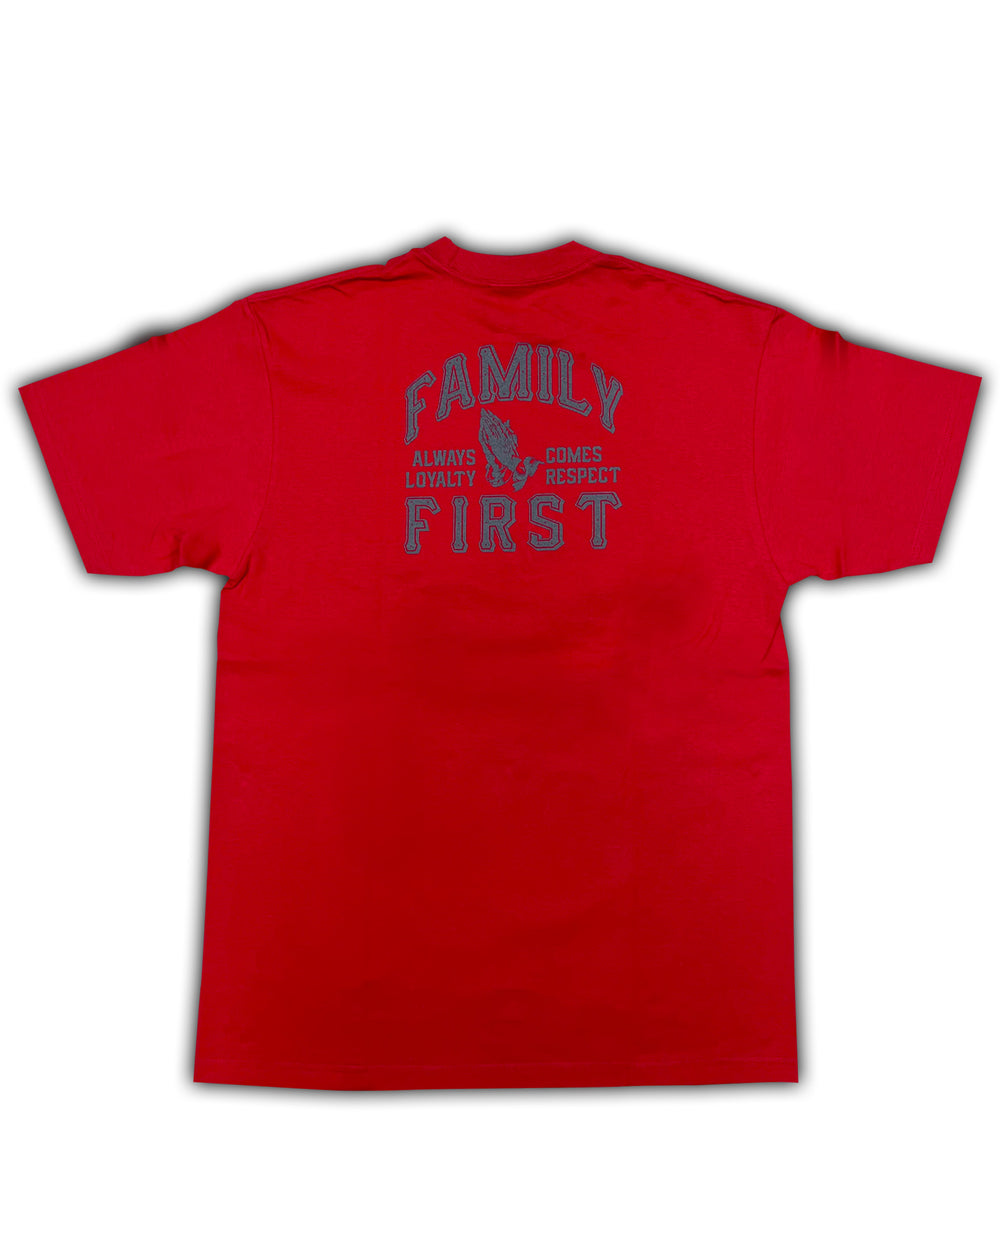 Family Praying Hands - Red Tee